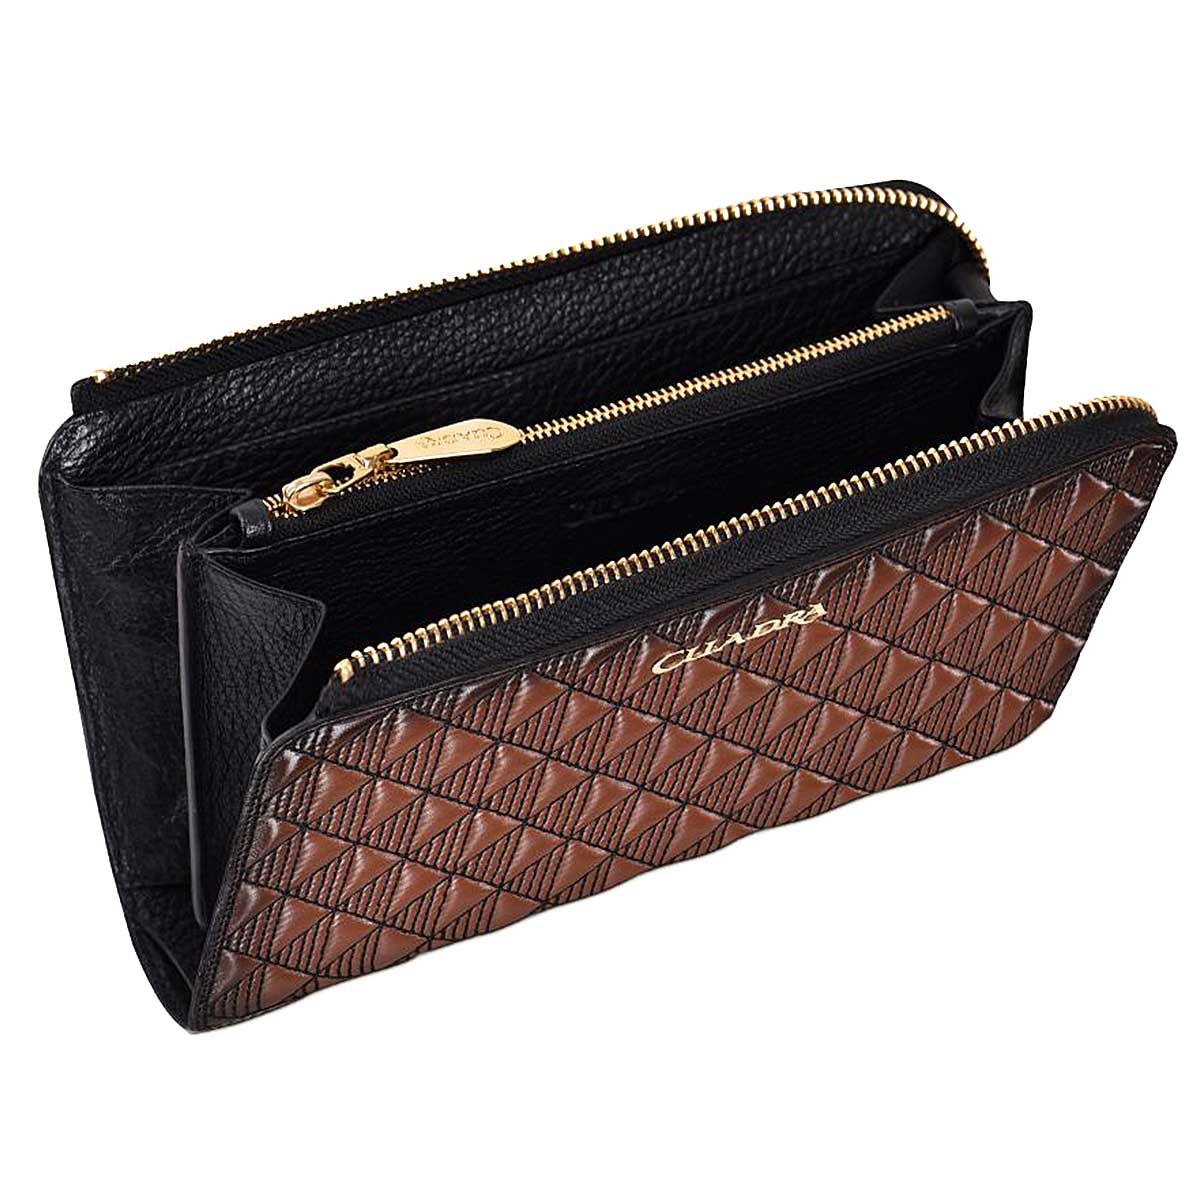 Ladies' Geometric Patterned Long Wallet With Double Zipper